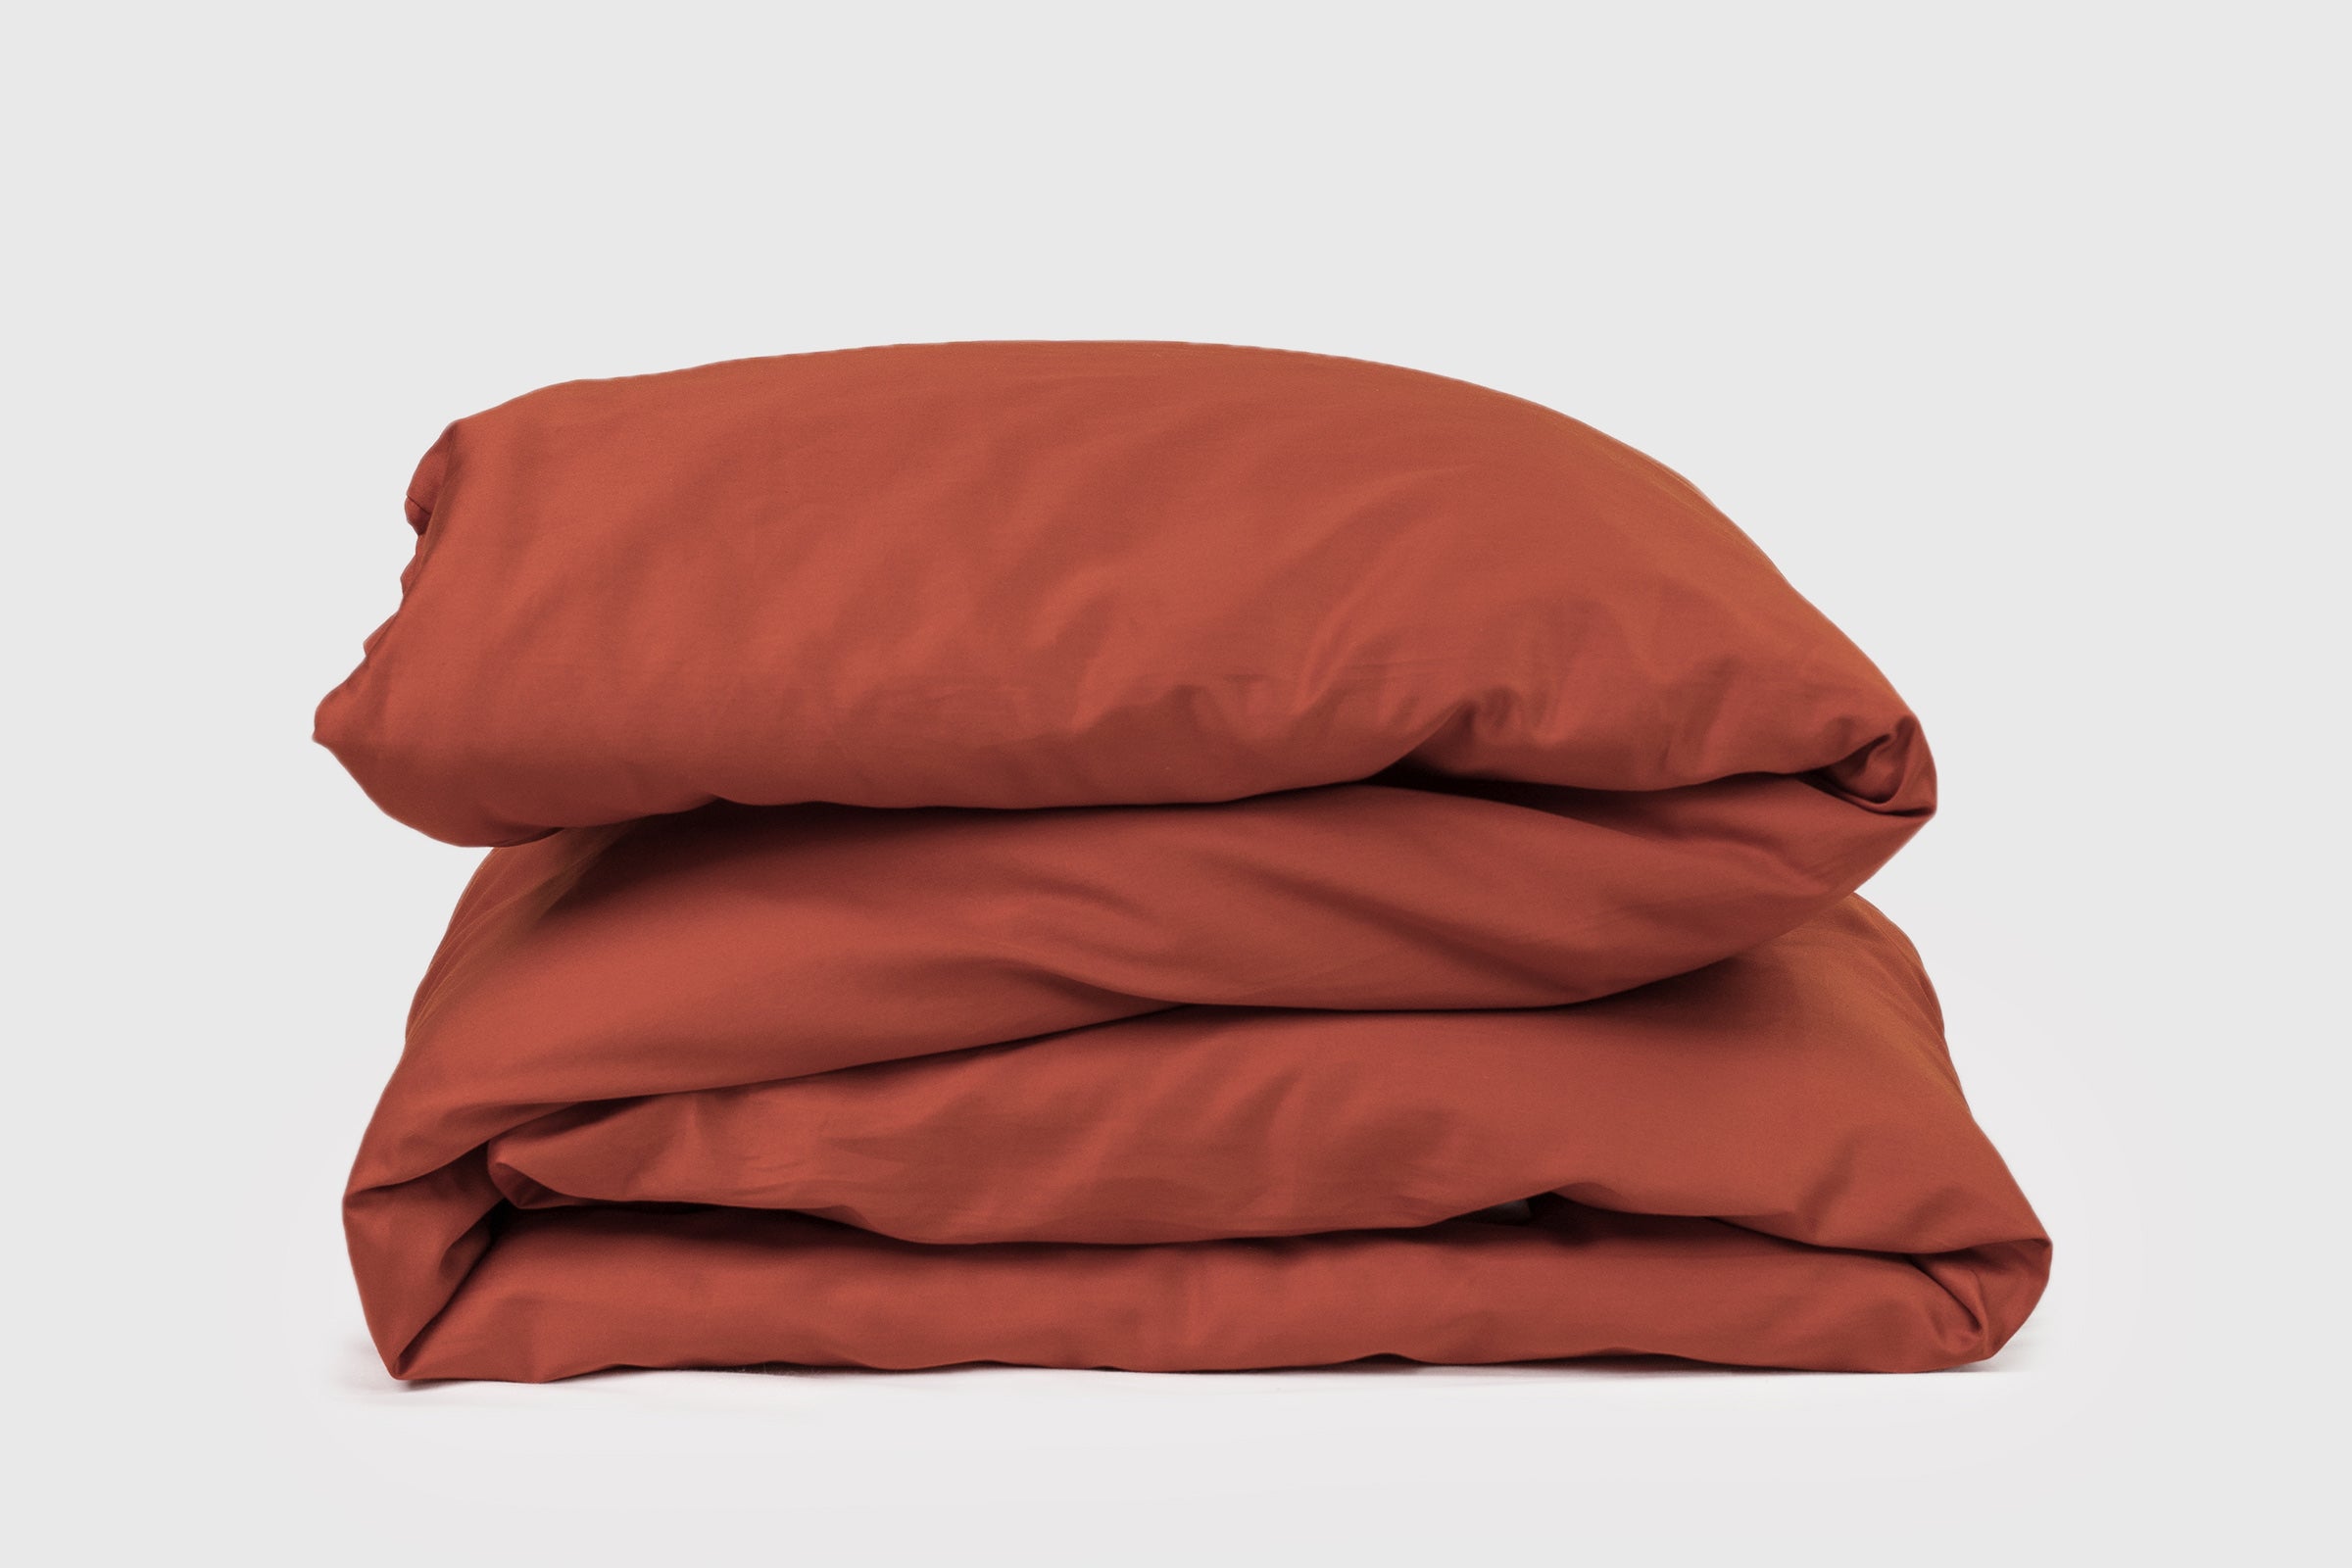 crisp-clay-duvet-cover-product-shot-by-sojao.jpg